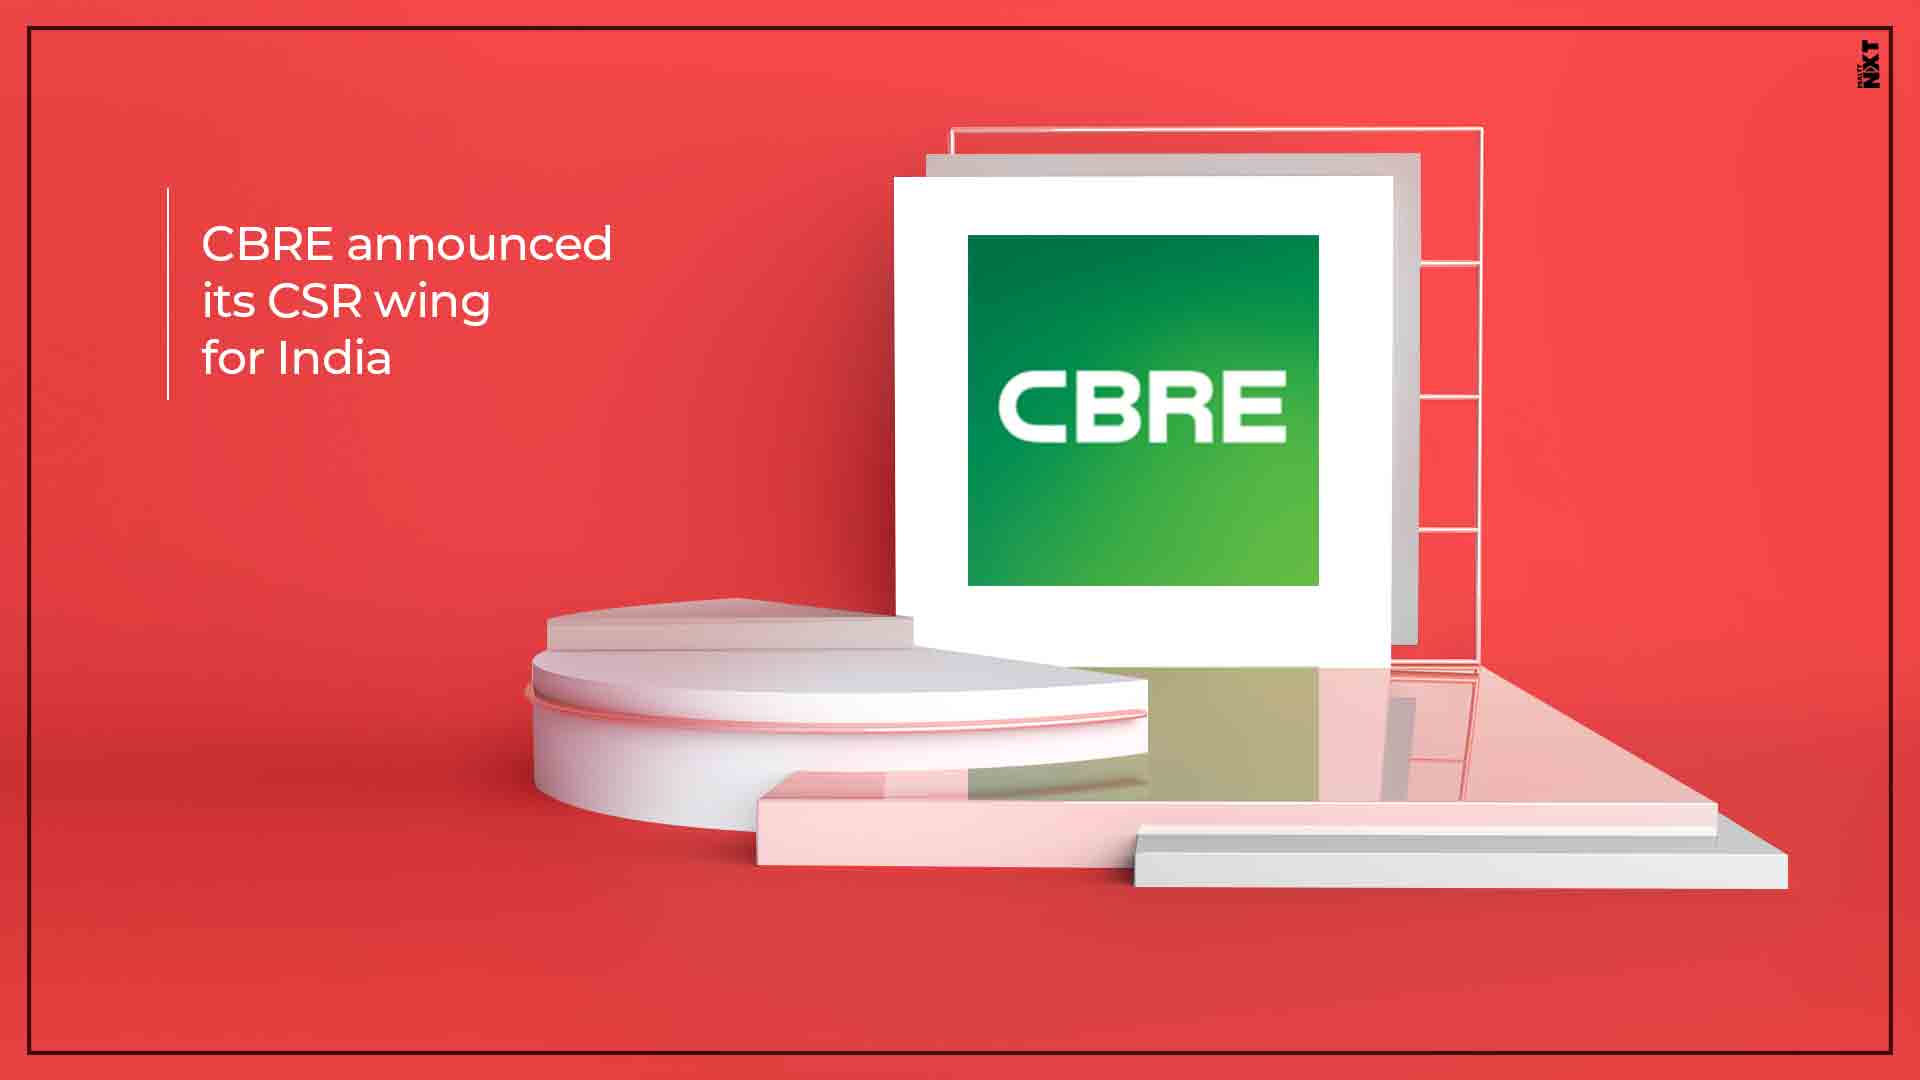 CBRE South Asia launched its foundation CBRE Cares'